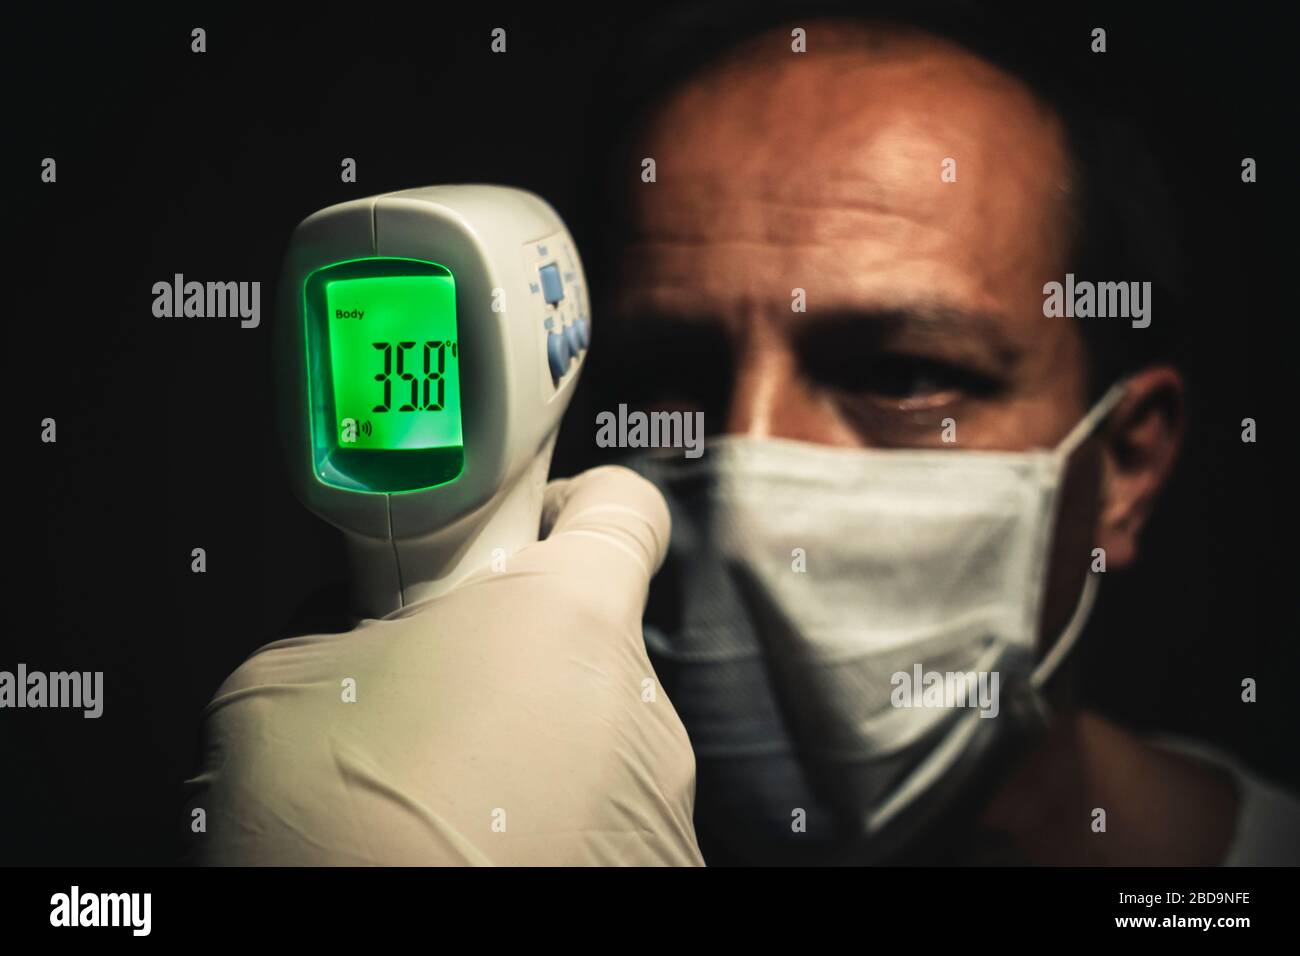 https://c8.alamy.com/comp/2BD9NFE/closeup-shot-of-a-infrared-thermometer-measuring-a-healthy-senior-mans-normal-body-temperature-for-coronavirus-2BD9NFE.jpg